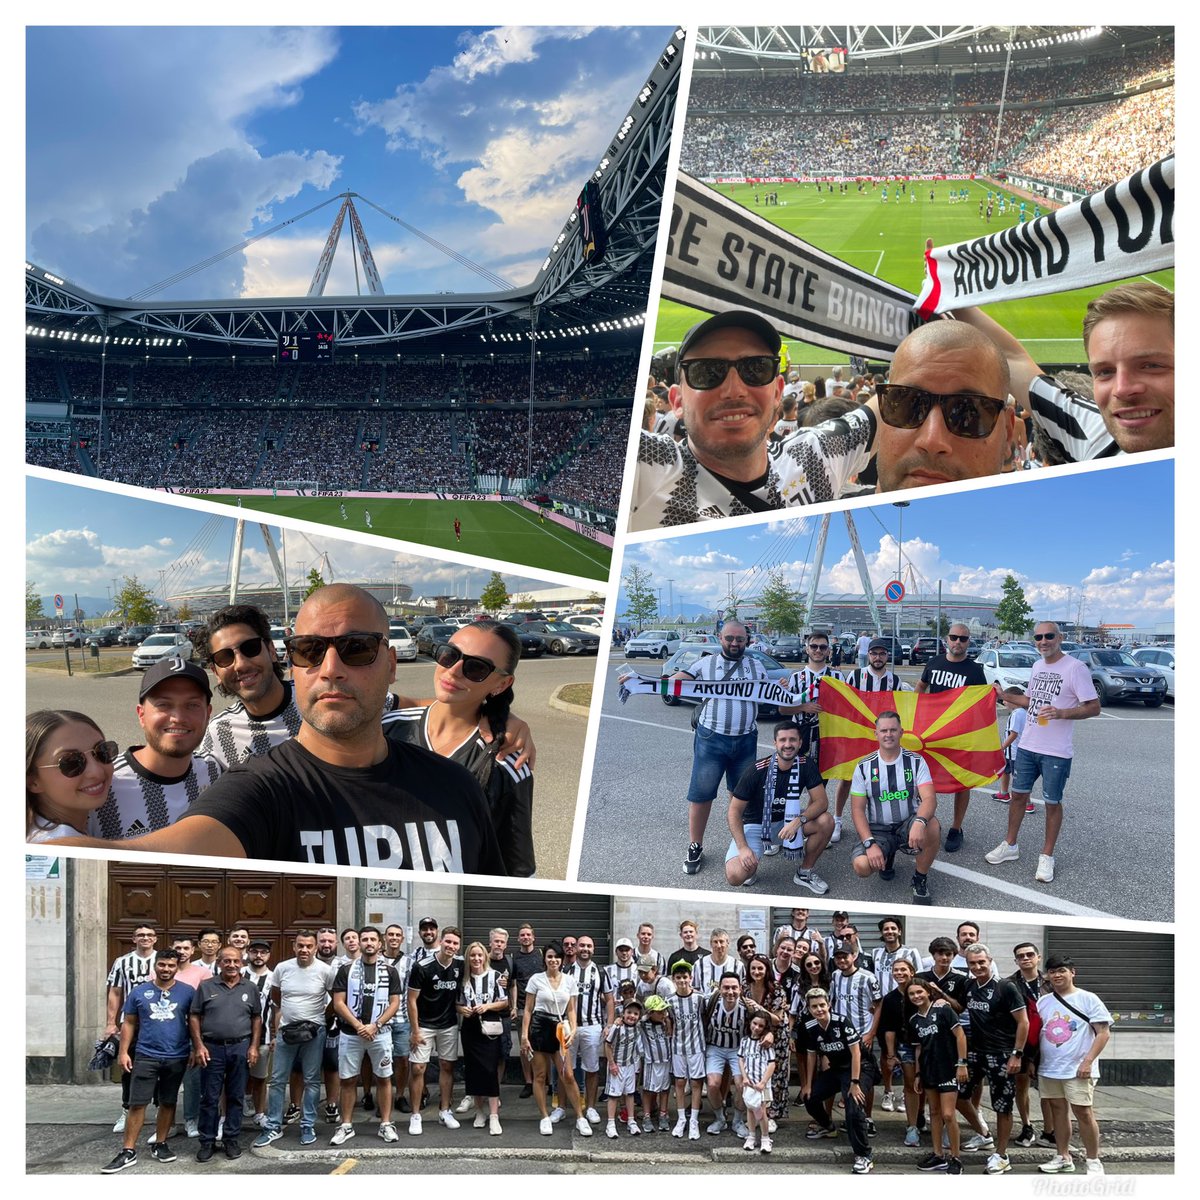 One of the biggest group ever, a bus filled with 55 ⚫️⚪️ friends from 19 different nationalities 🇳🇱🇻🇪🇪🇸🇧🇷🇲🇰🇬🇧🇮🇩🇨🇦🇲🇹🇺🇸🇬🇷🇫🇮🇮🇹🇸🇪🇿🇦🇦🇺🇨🇳🇨🇴🇱🇺 This is really a unique experience. Thanks to those who came yesterday… and to those who will come in the future! #YourFamilyInTurin